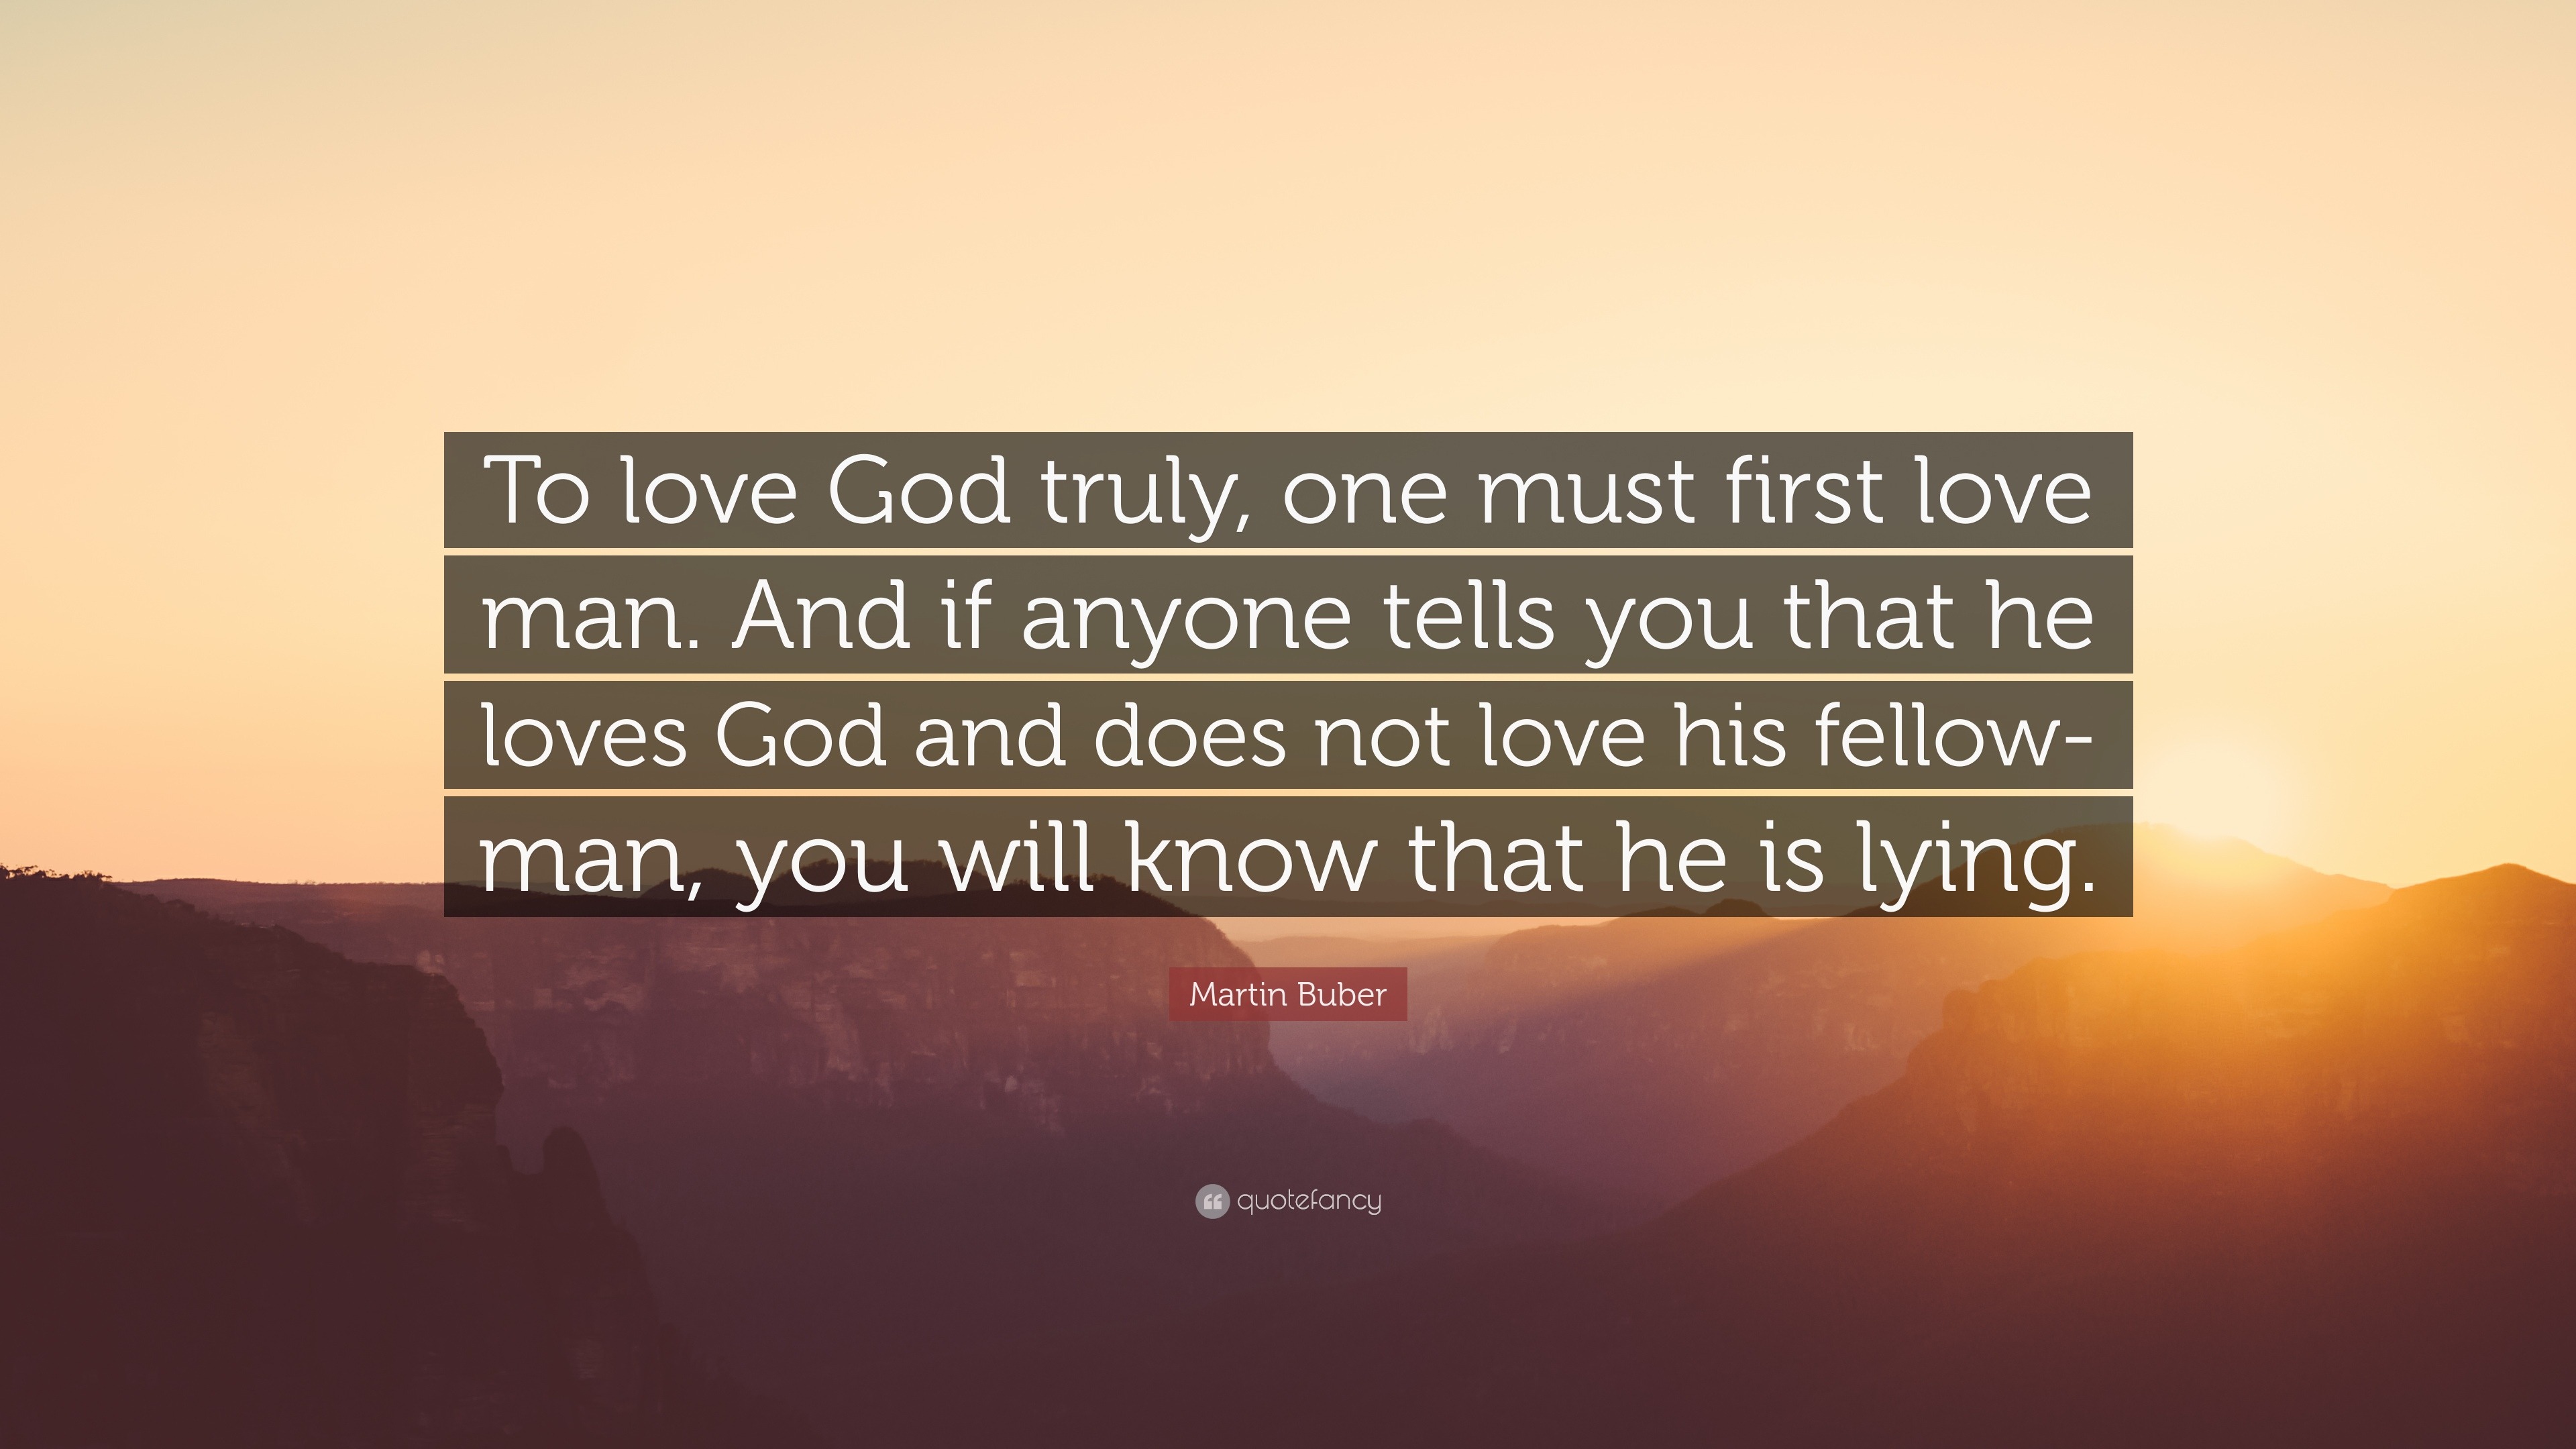 Martin Buber Quote To Love God Truly One Must First Love Man And If Anyone Tells You That He Loves God And Does Not Love His Fellow Man